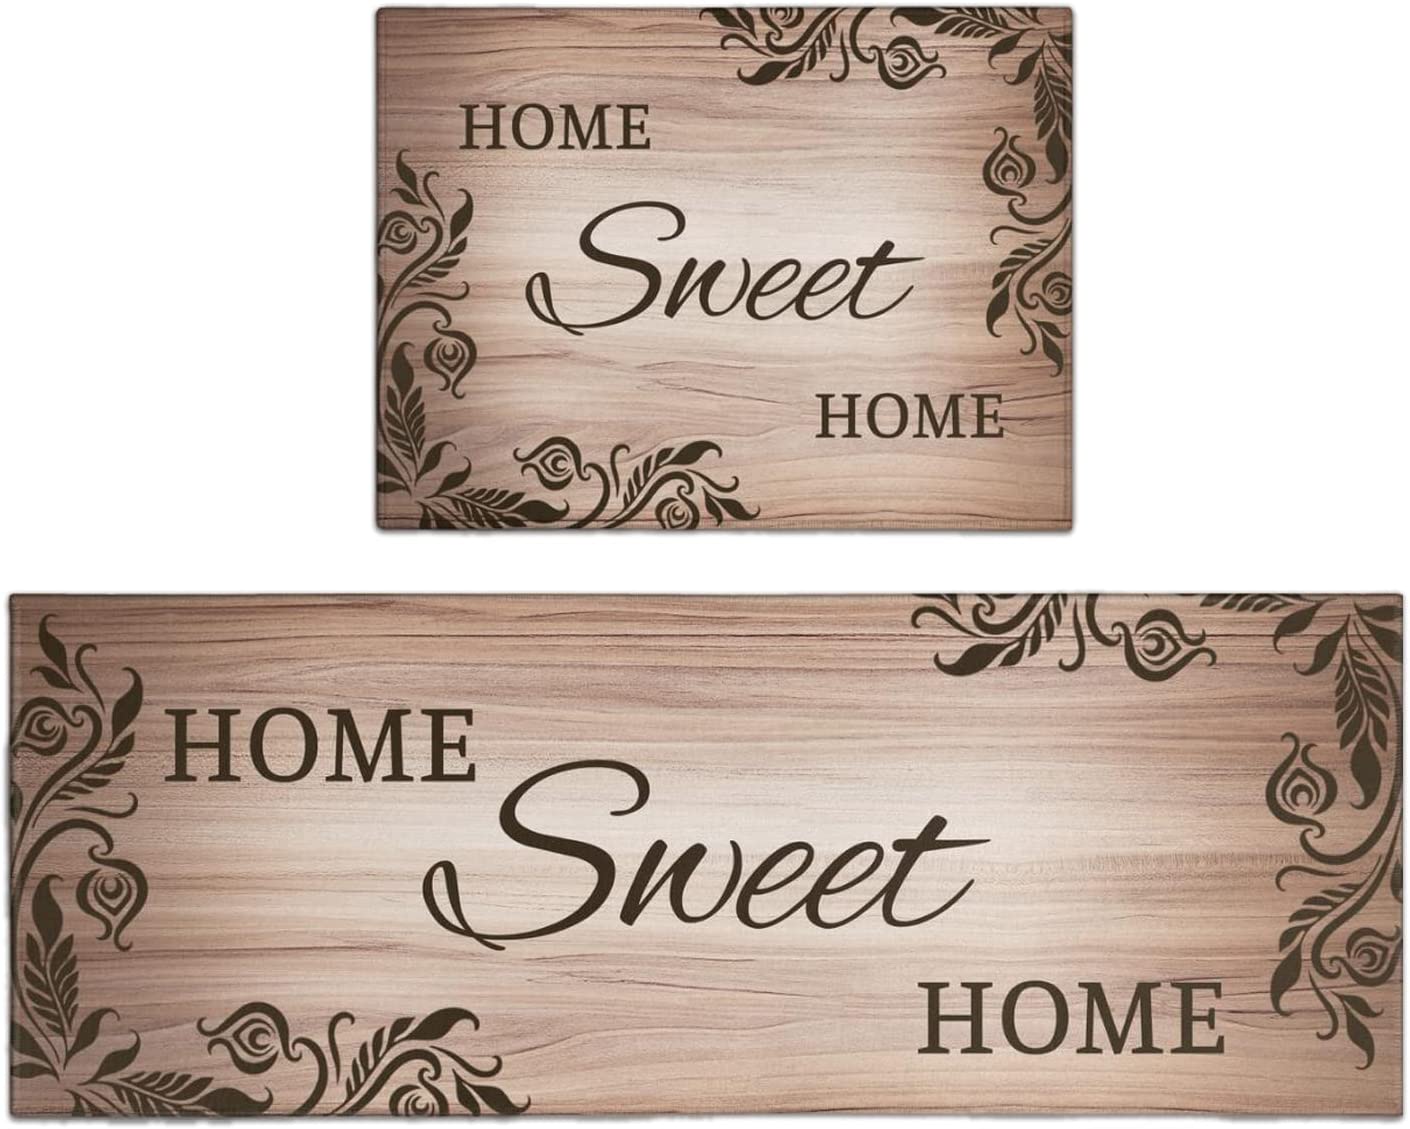 Kitchen Mats Floor Home Sweet Home - Kitchen Mat Set of 2, Brown Kitchen Rug, Farmhouse Kitchen Rugs for Kitchen Sink Area, Kitchen Sink Rugs and Mats, Kitchen Rugs with Words, 17x24 and 17x48 Inch - image 1 of 5